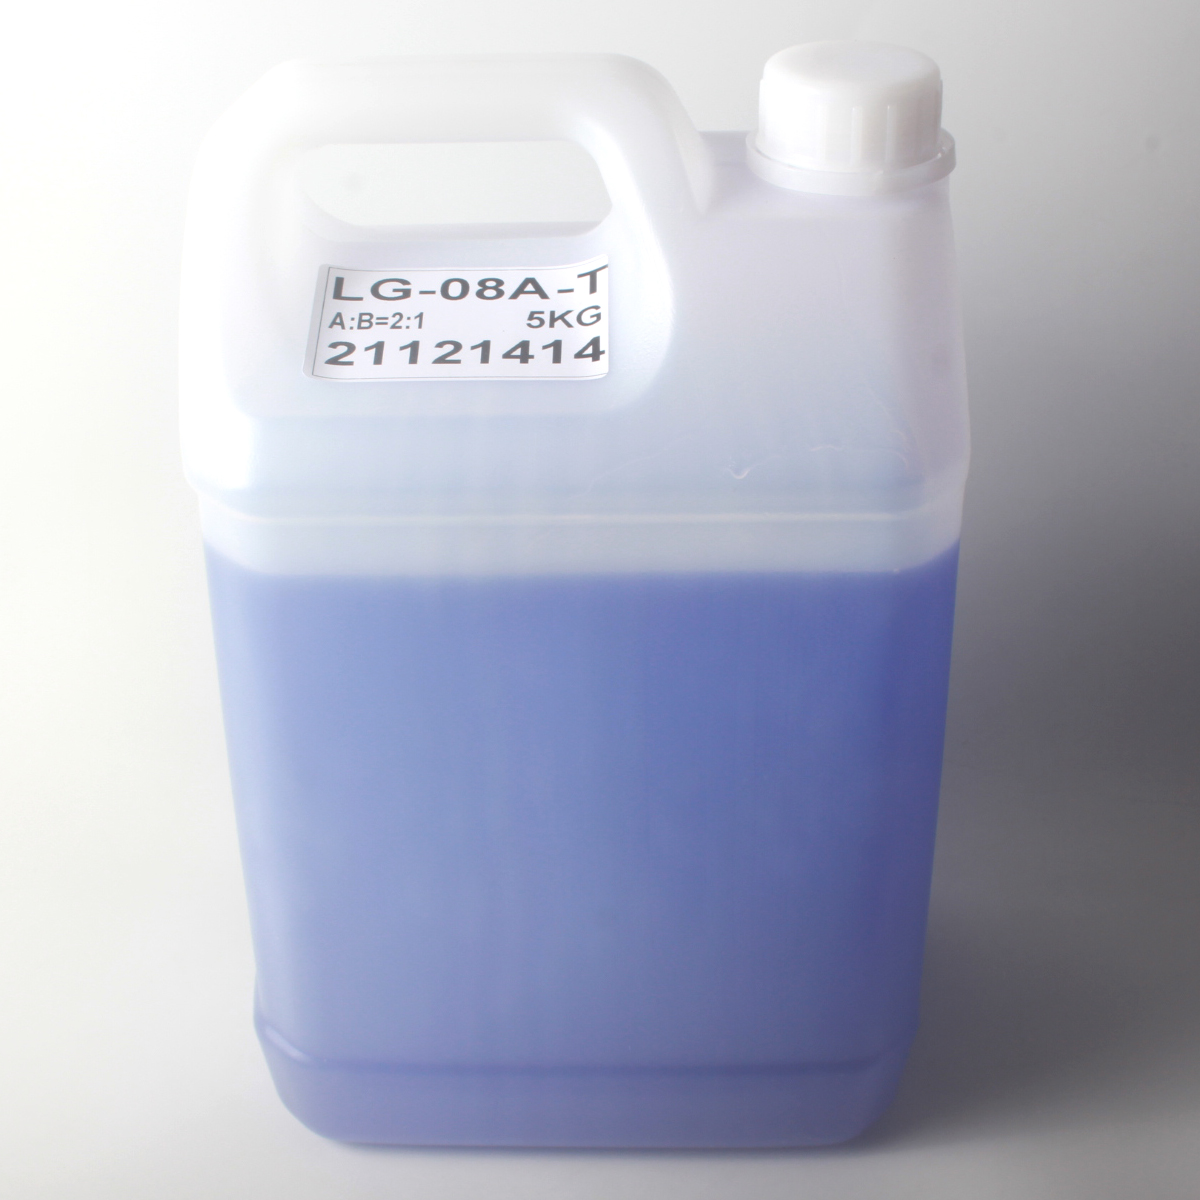 Epoxy A/B resin glue for carbon fabric composite material products prepreg cure process 